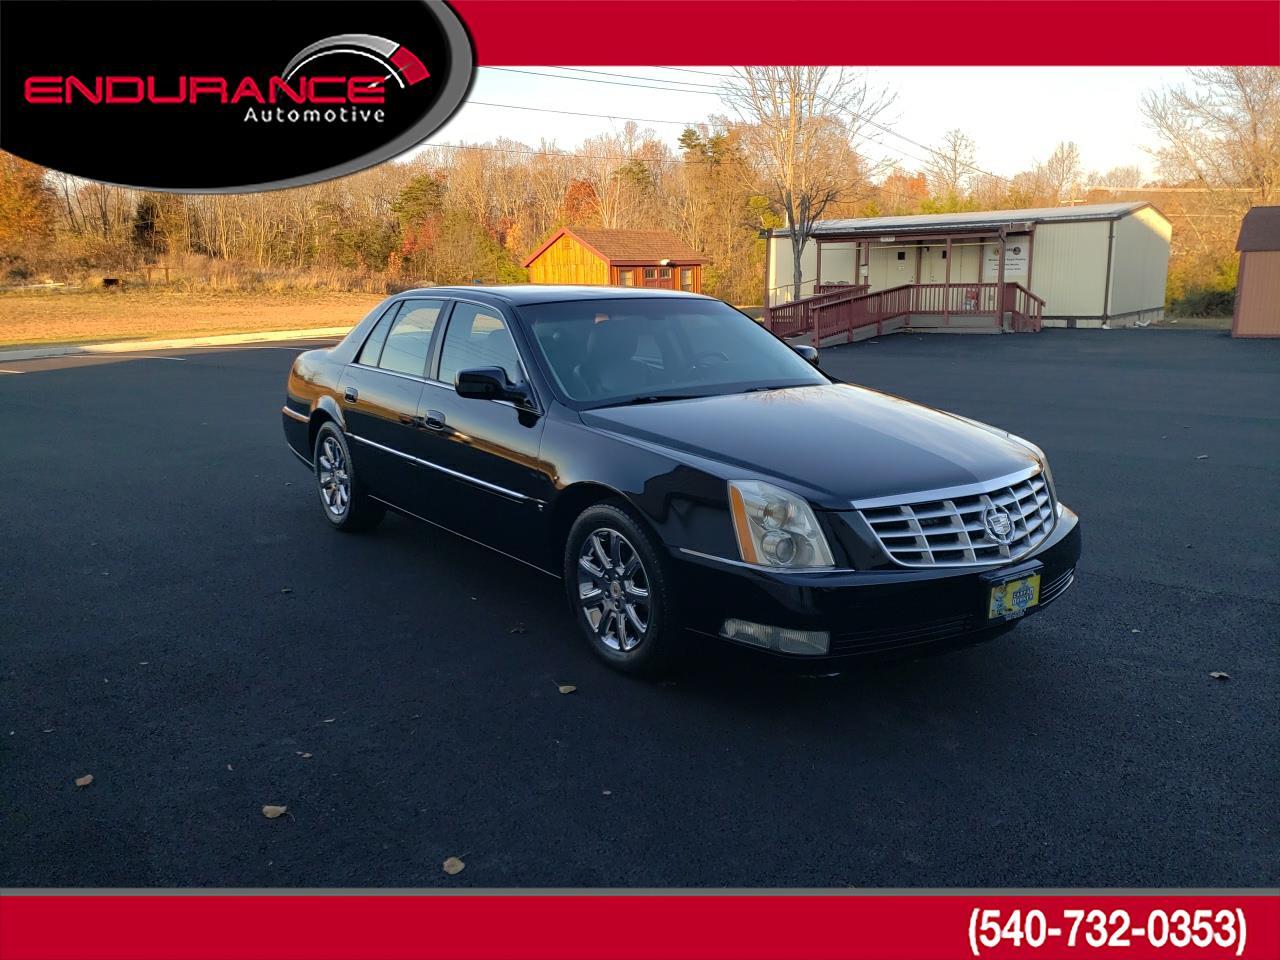 Cadillac DTS Professional 4dr Sdn Limousine 2009